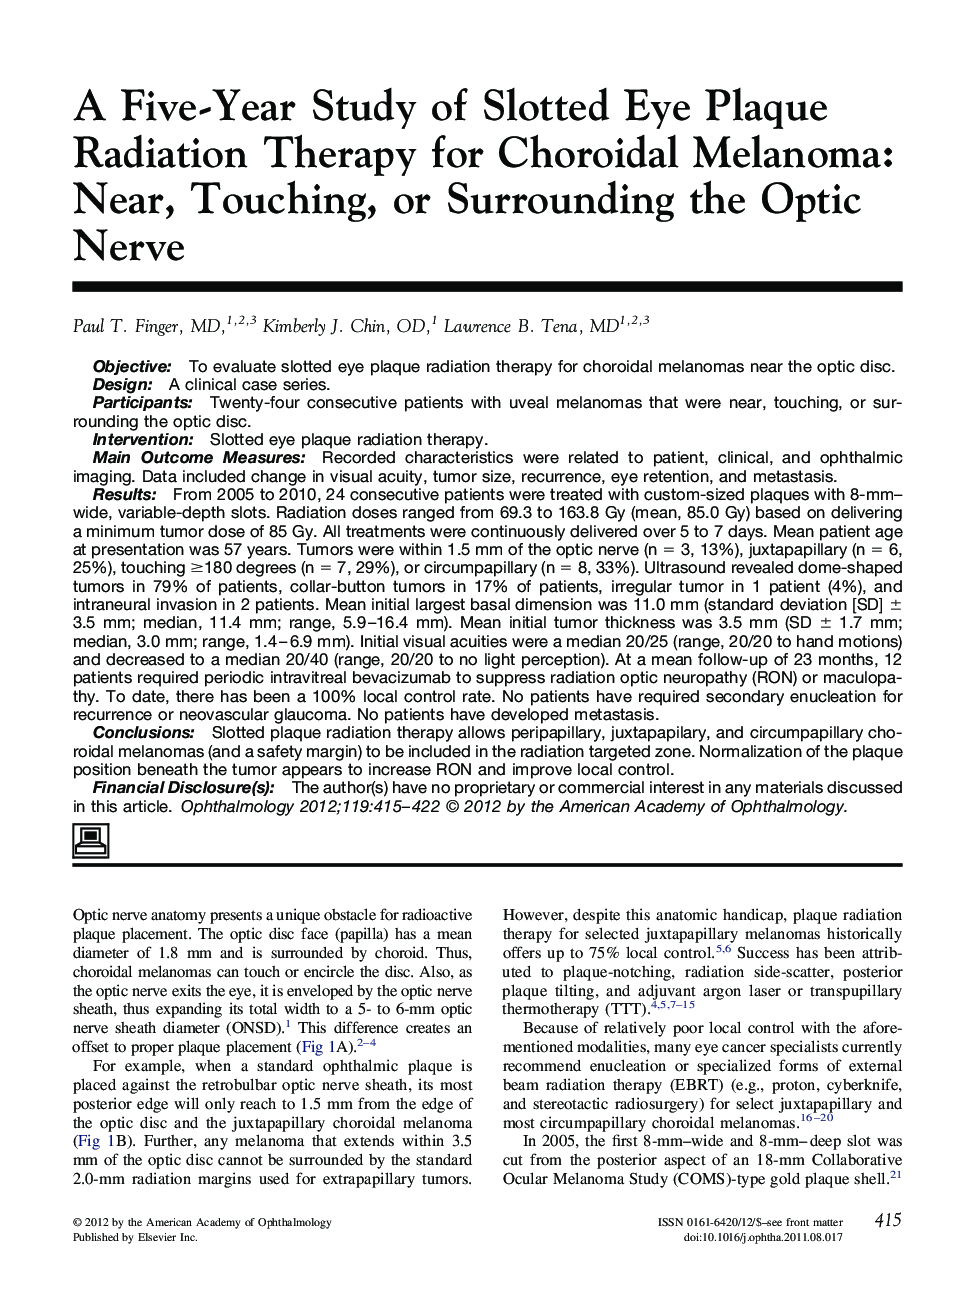 A Five-Year Study of Slotted Eye Plaque Radiation Therapy for Choroidal Melanoma: Near, Touching, or Surrounding the Optic Nerve